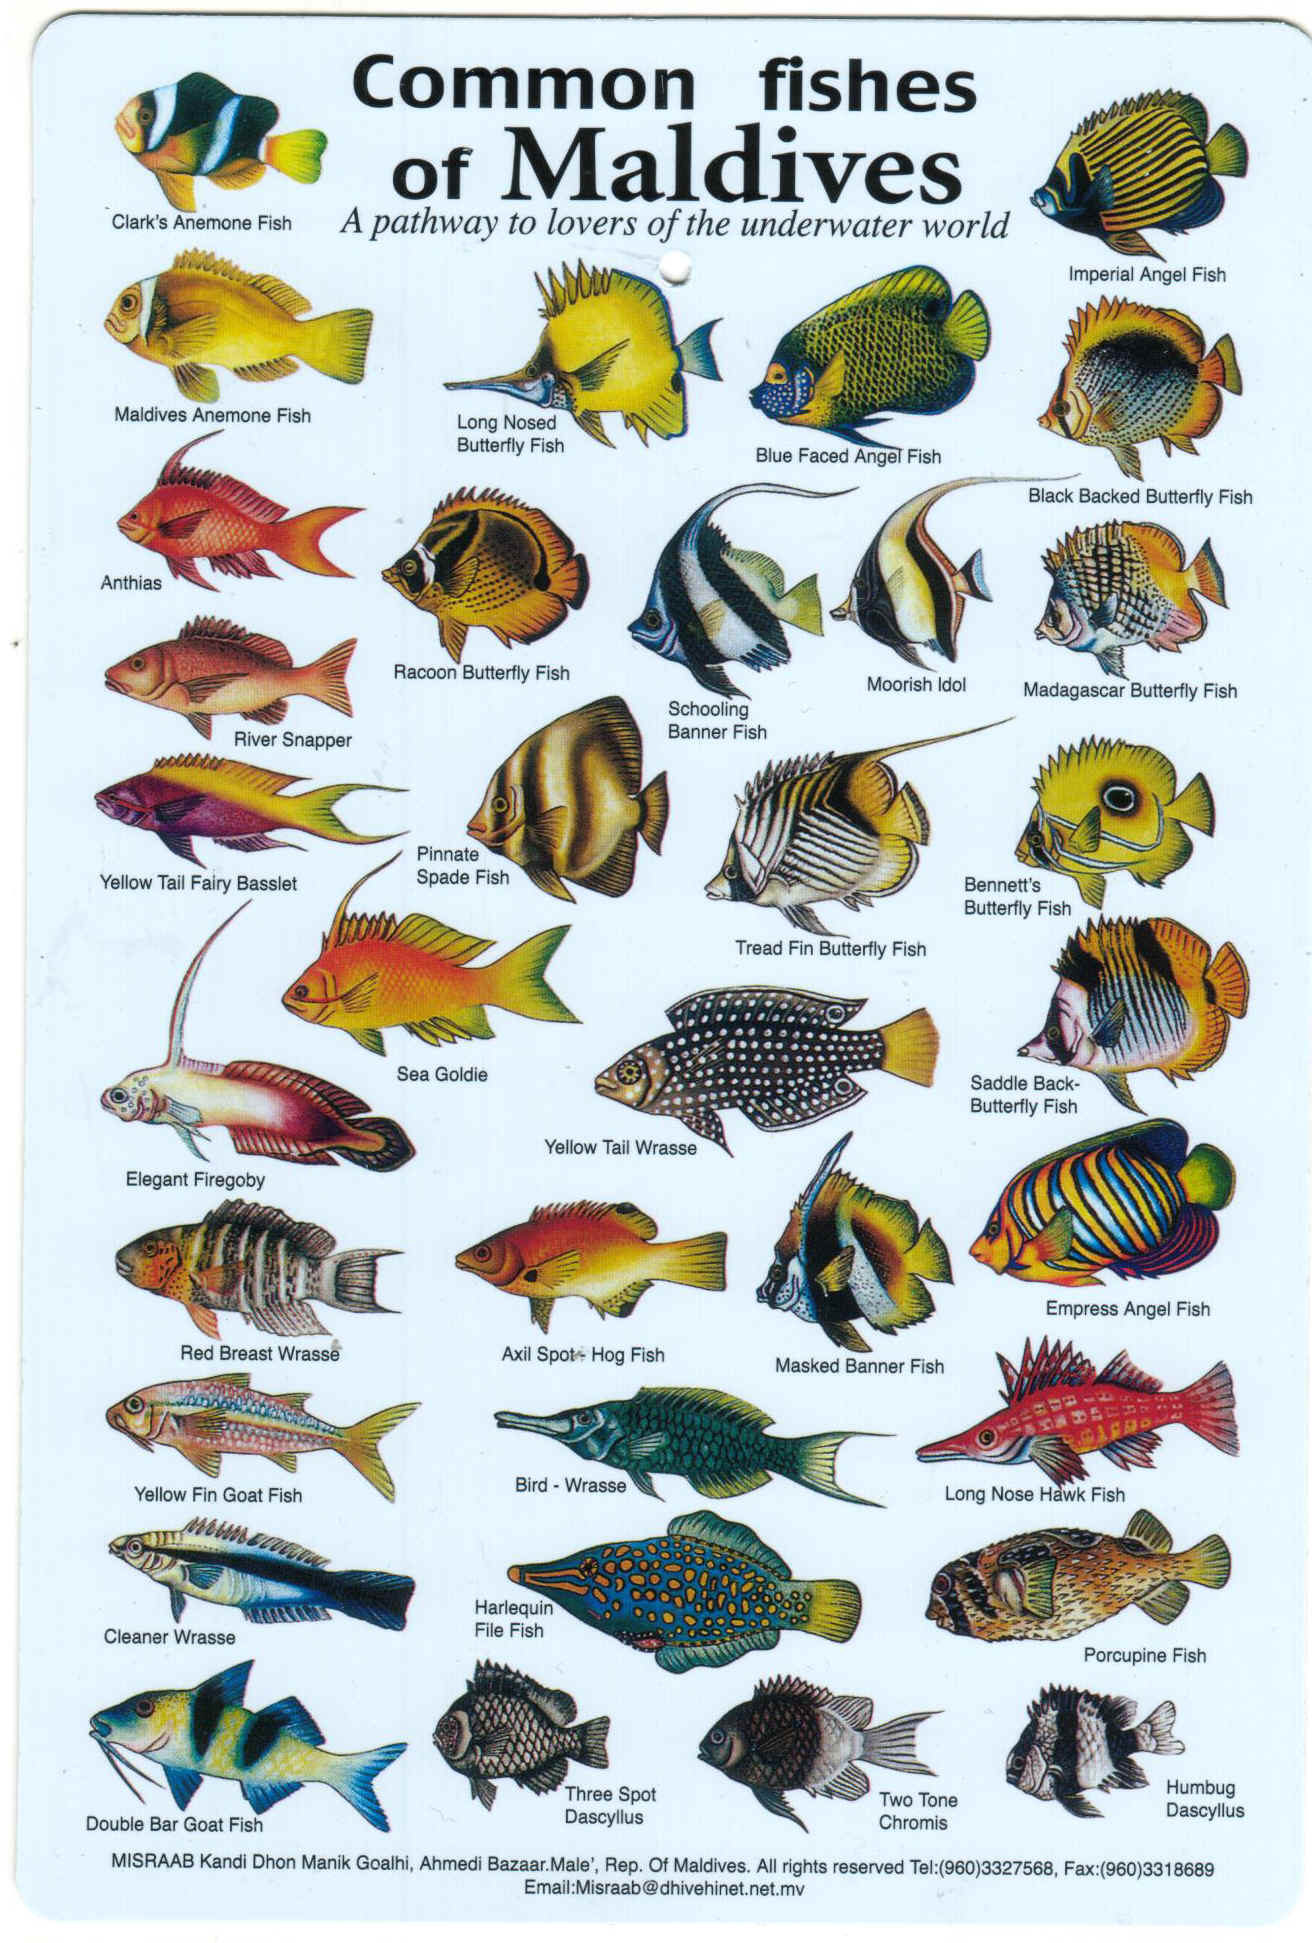 Fishes of the Maldives Identification Chart (water resistant laminated card)